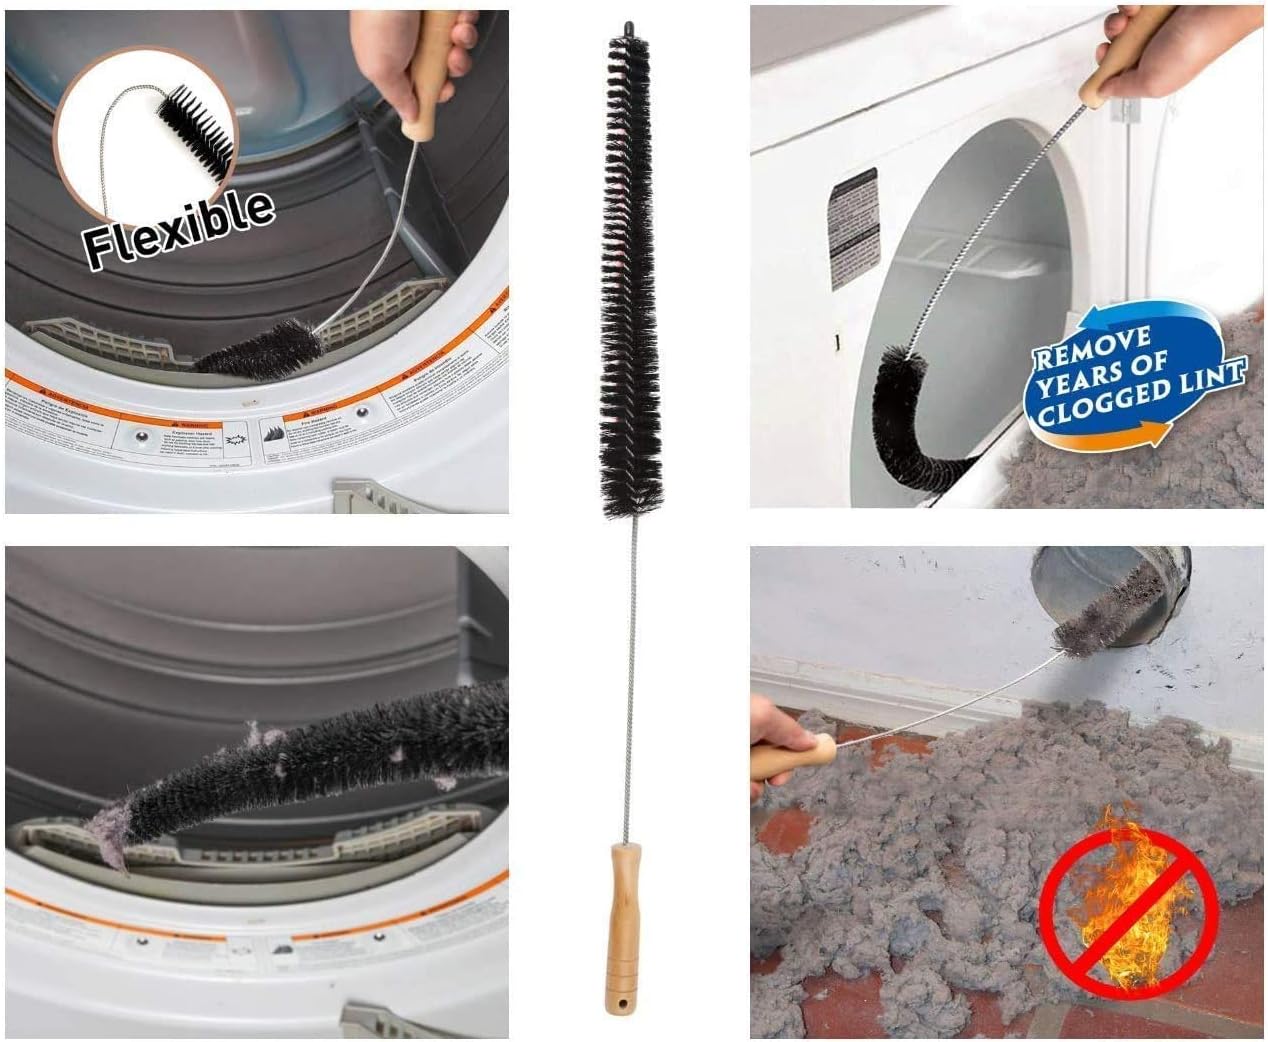 Brush Cleaning Cleaner Dryer Coil Car Radiator Lint Vent